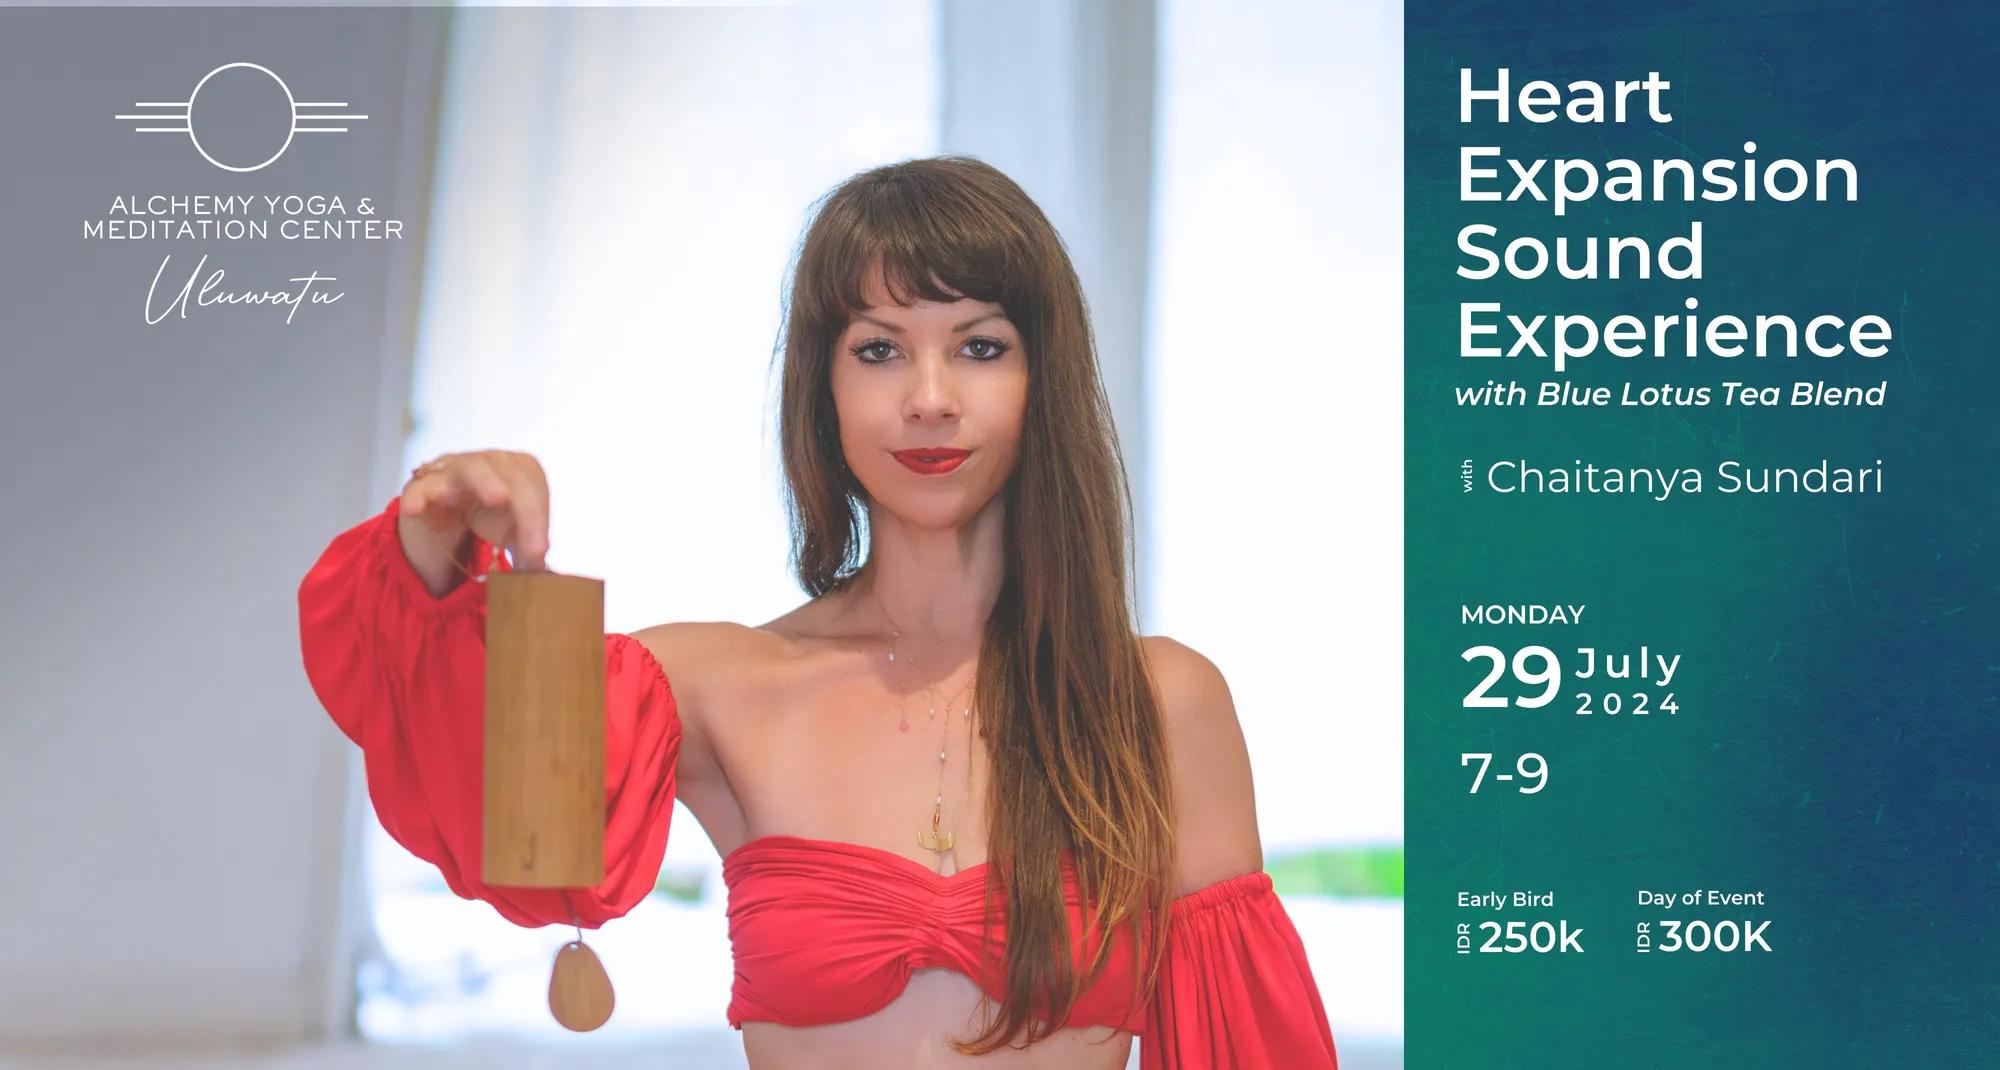 Event at Alchemy Yoga and Meditation Center on July 29 2024: Heart Expansion Sound Experience with Blue Lotus Tea Blend